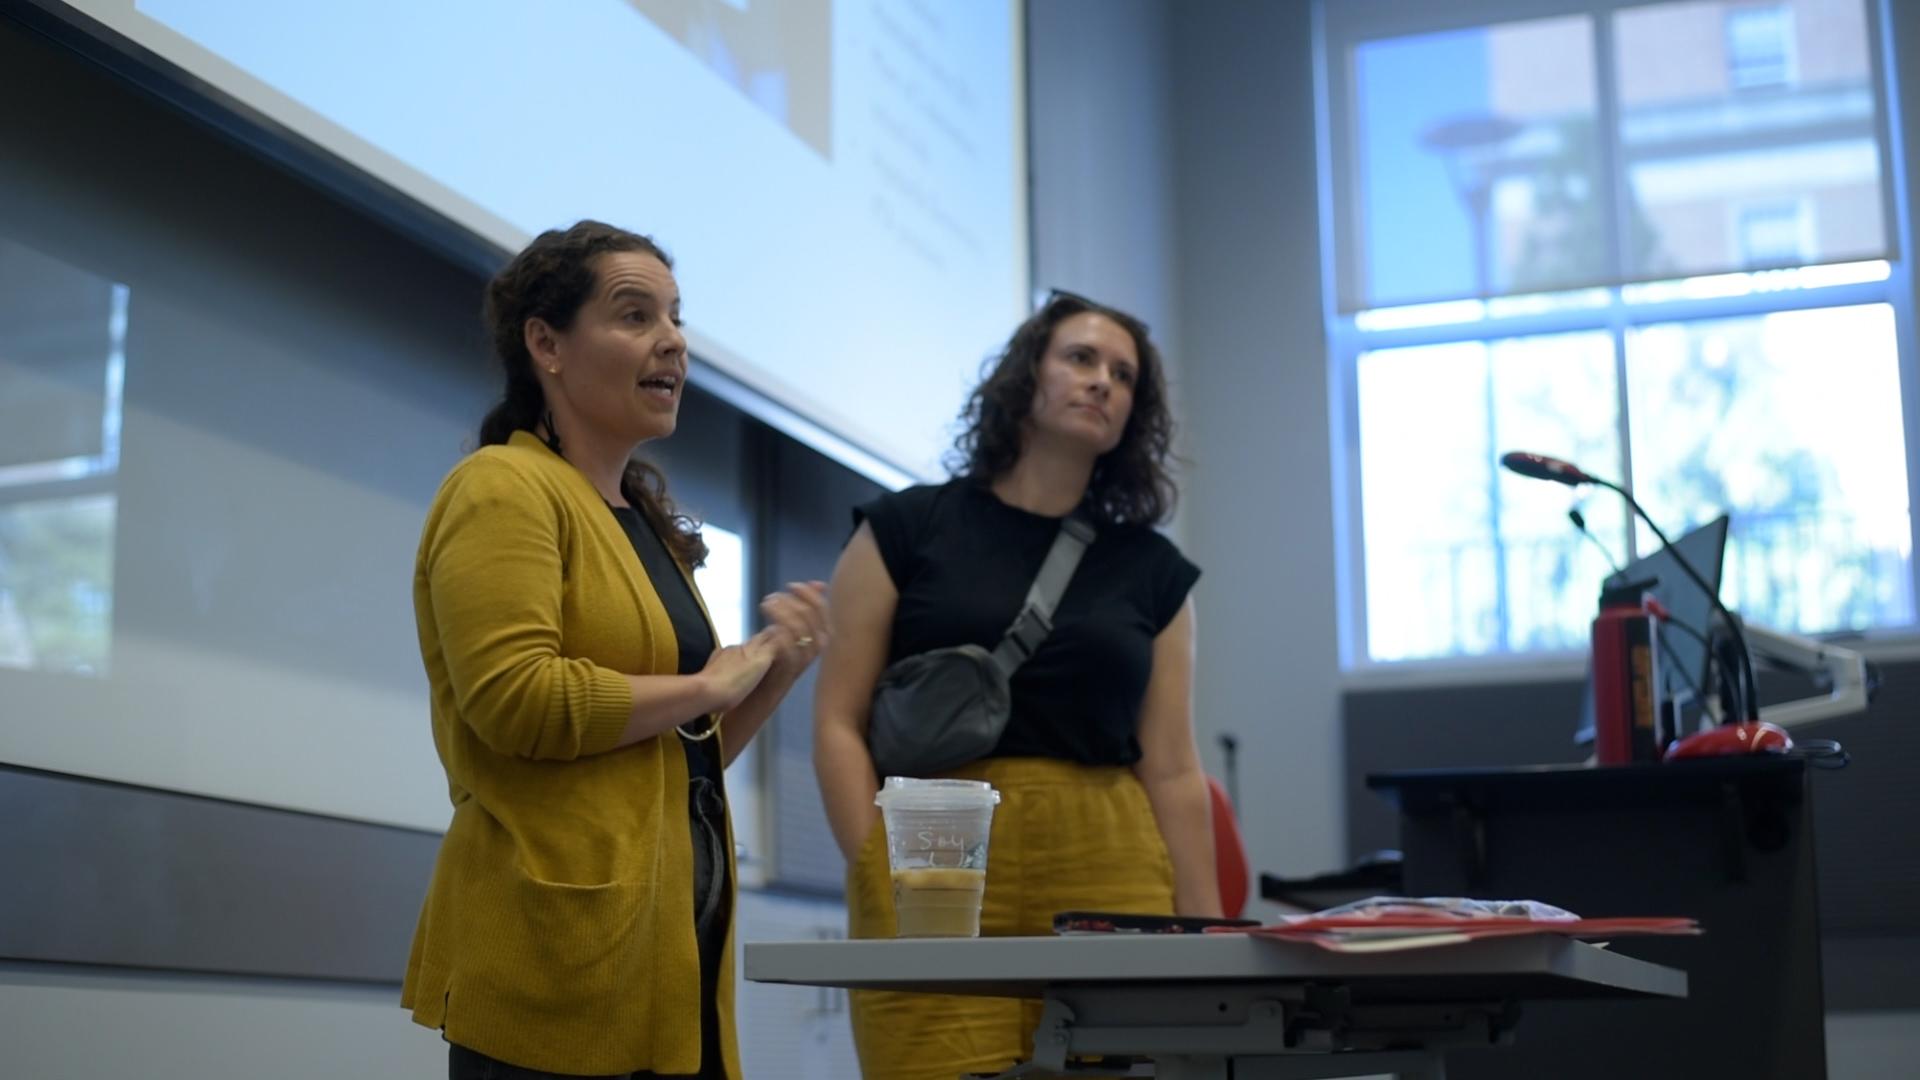 Presenters from a gun violence prevention nonprofit speak to UMD students